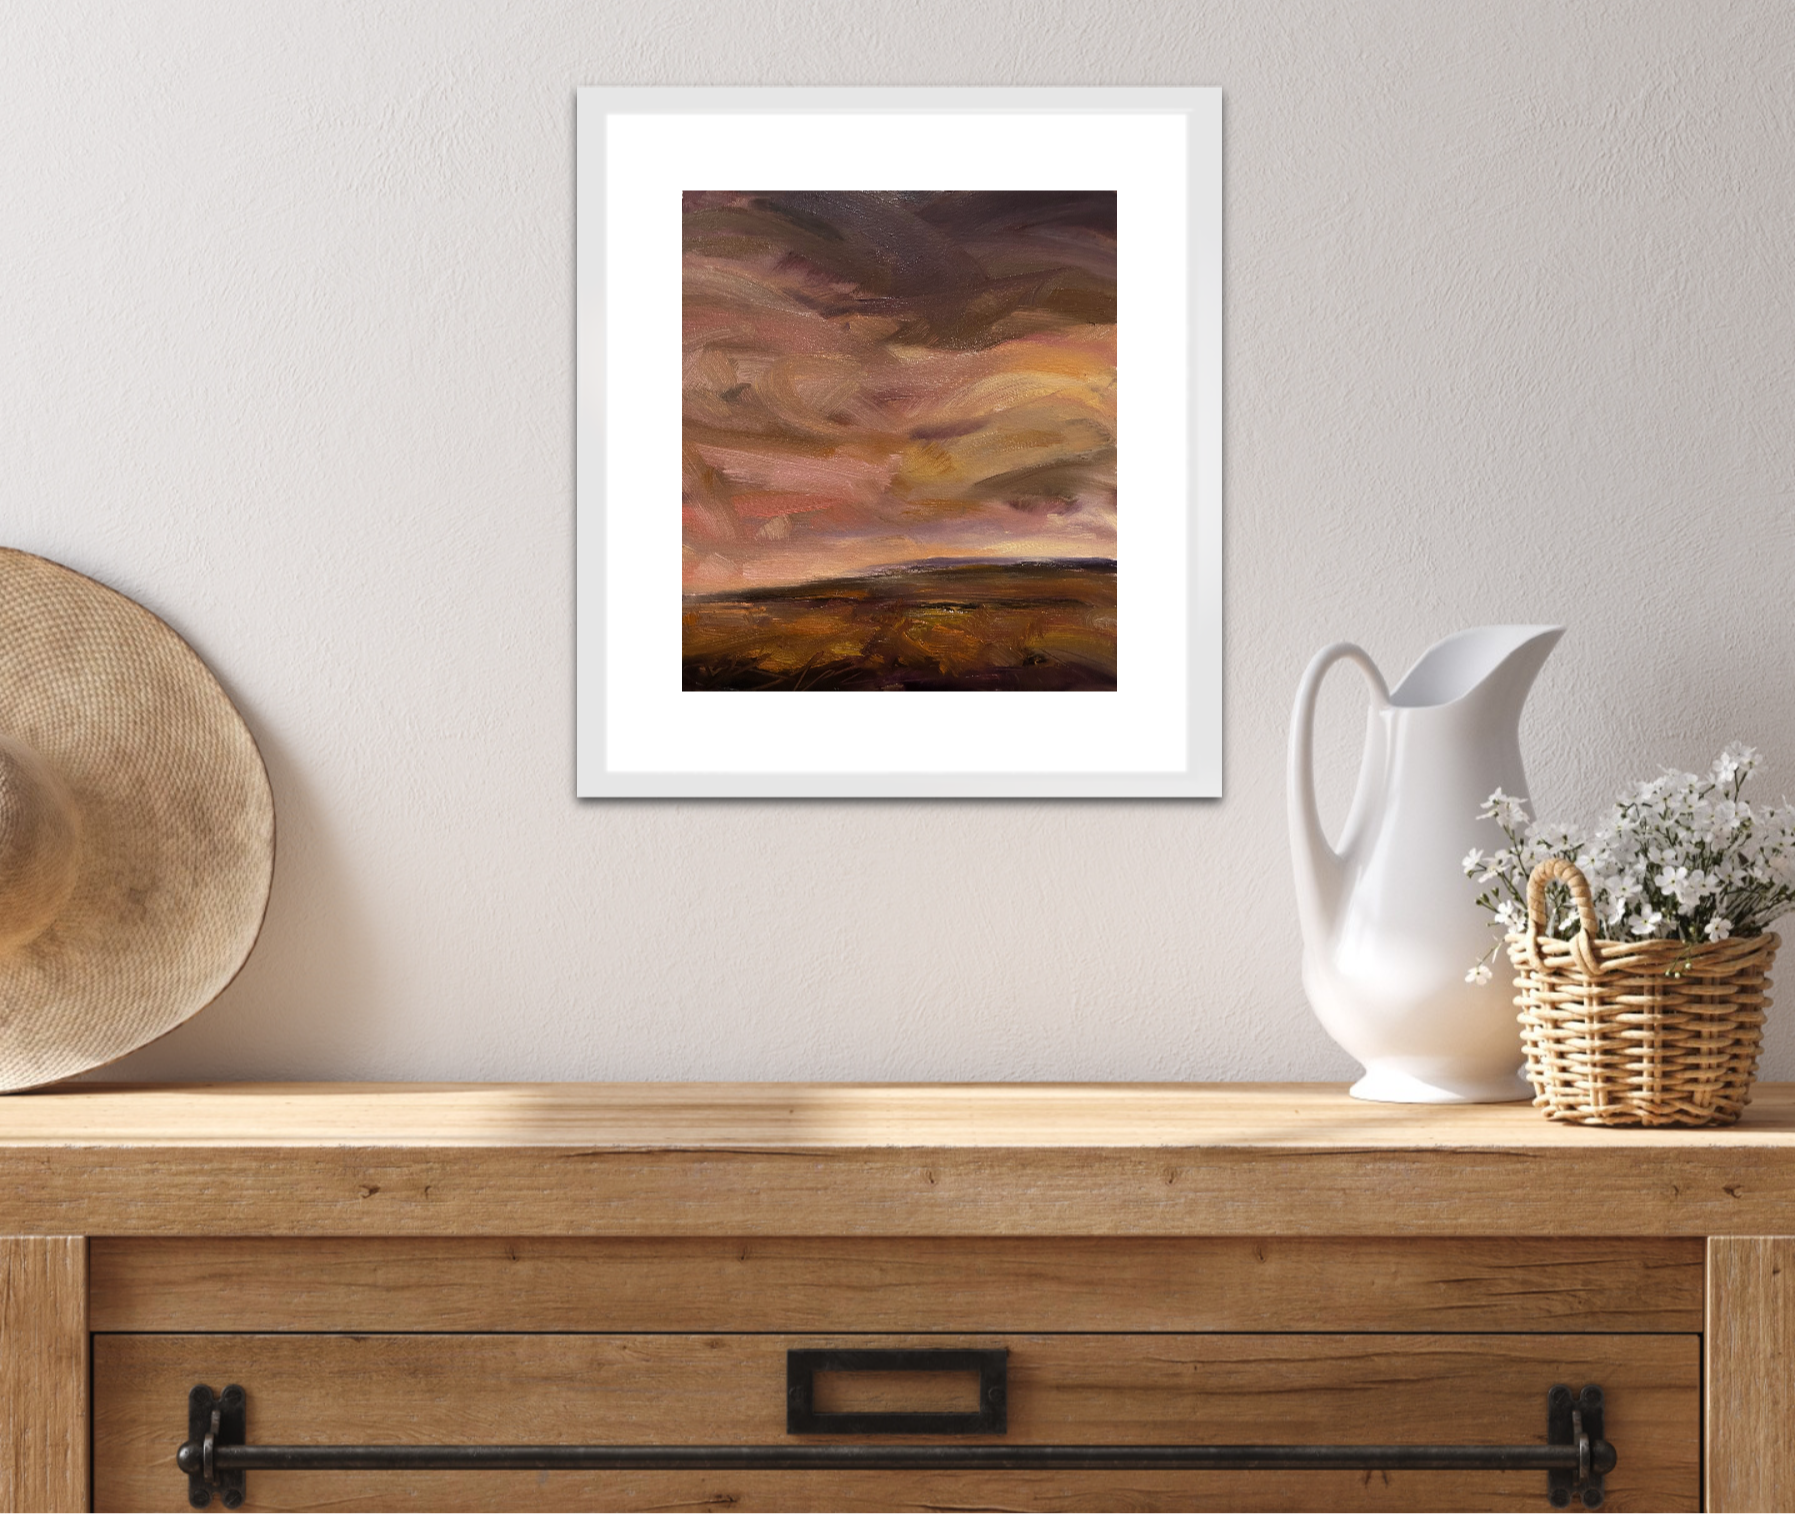 My Soul's Home Original Oil On Paper Landscape Painting In Room Setting 2